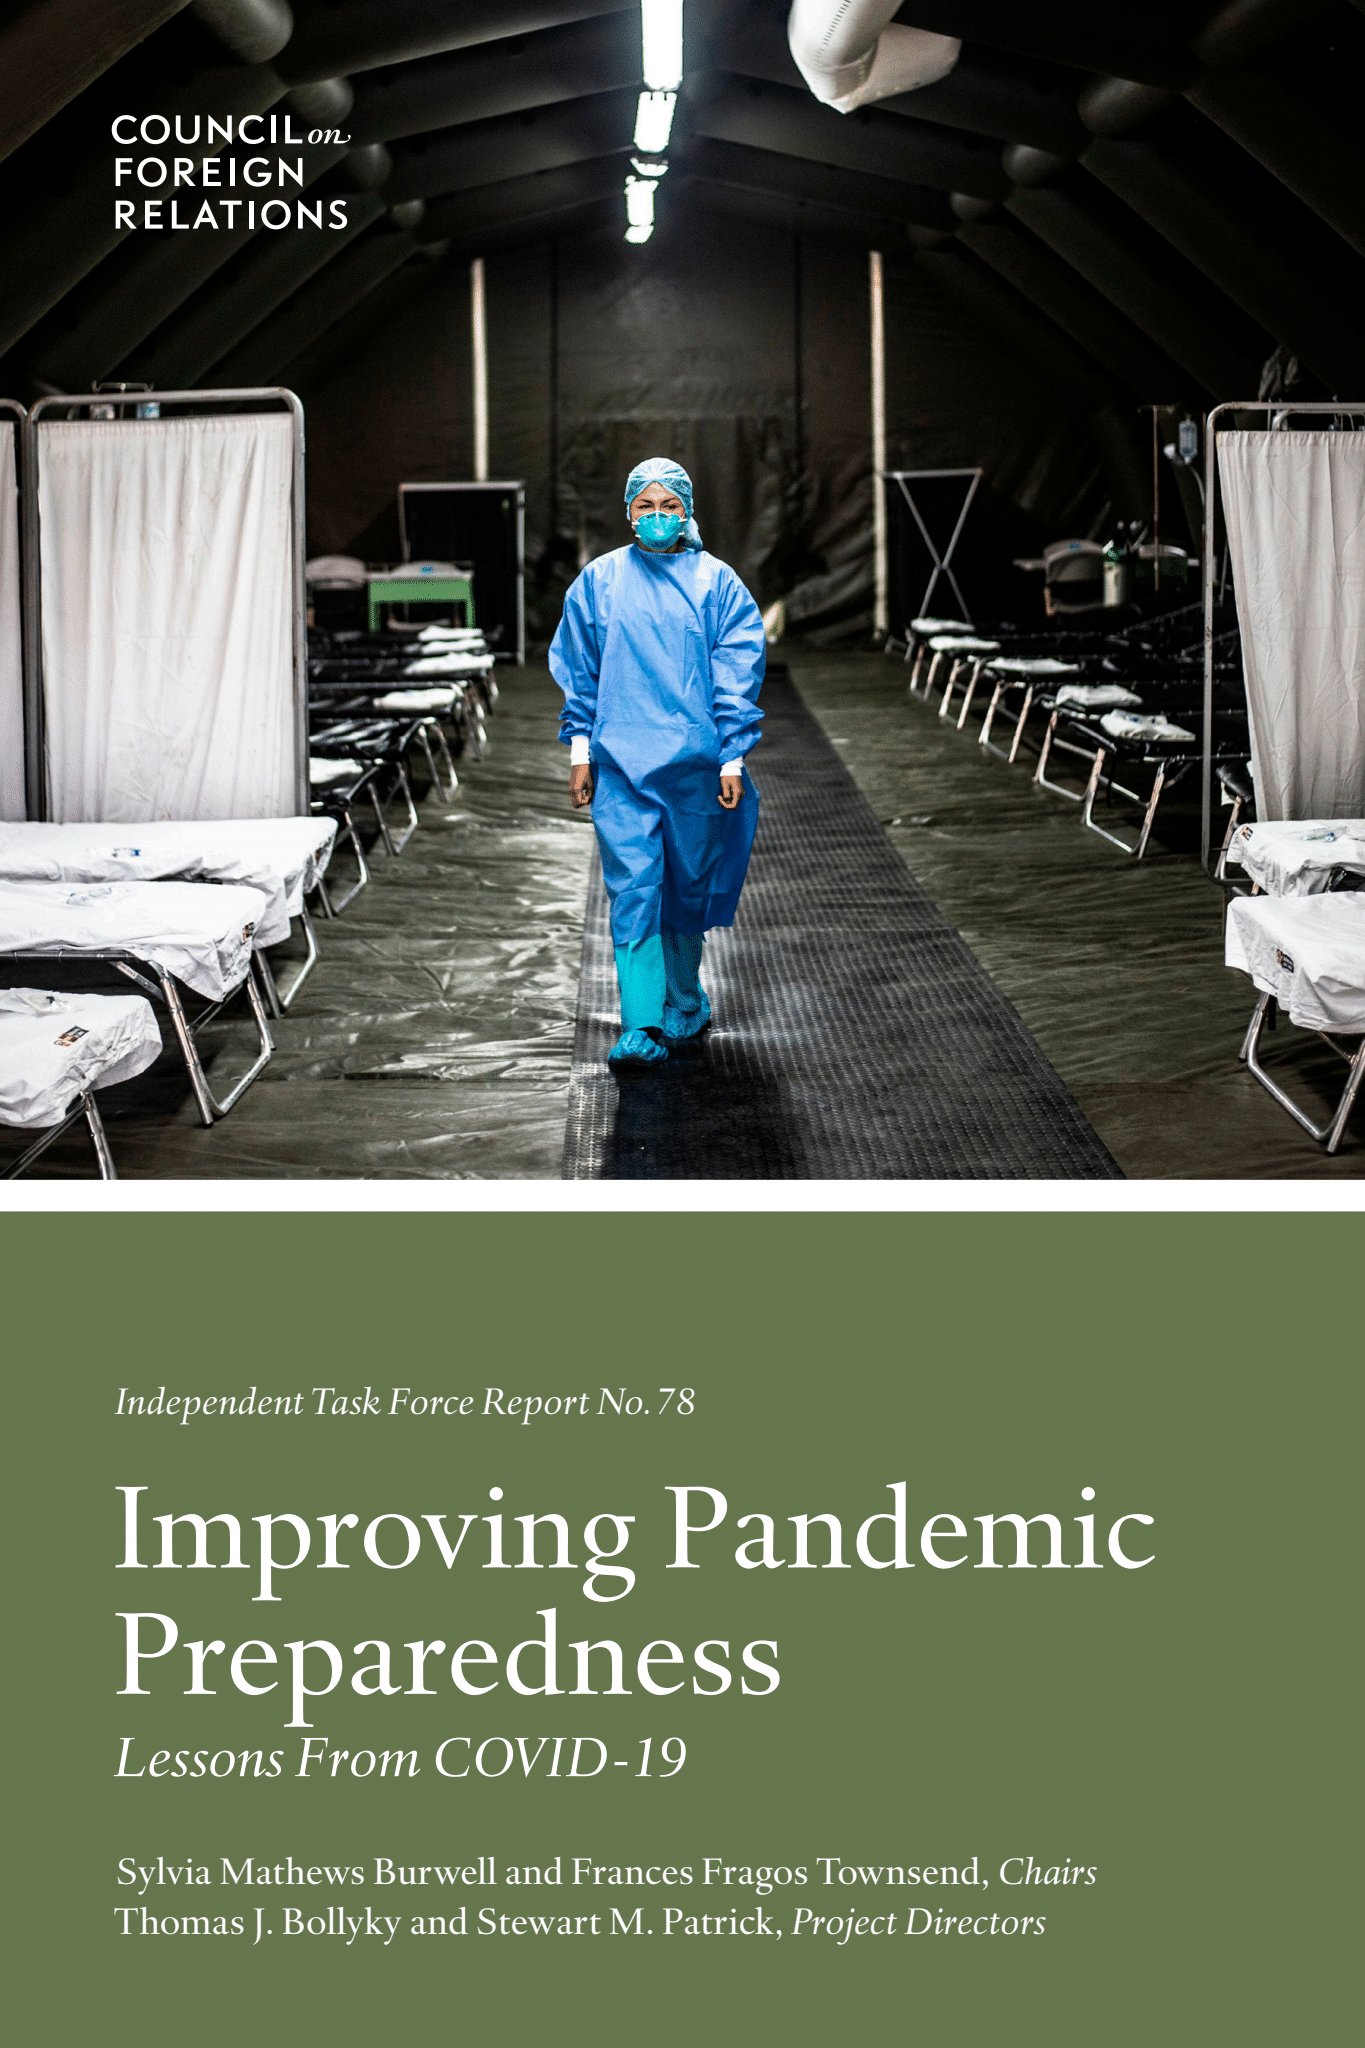 Guidance in the Midst of a Global Pandemic